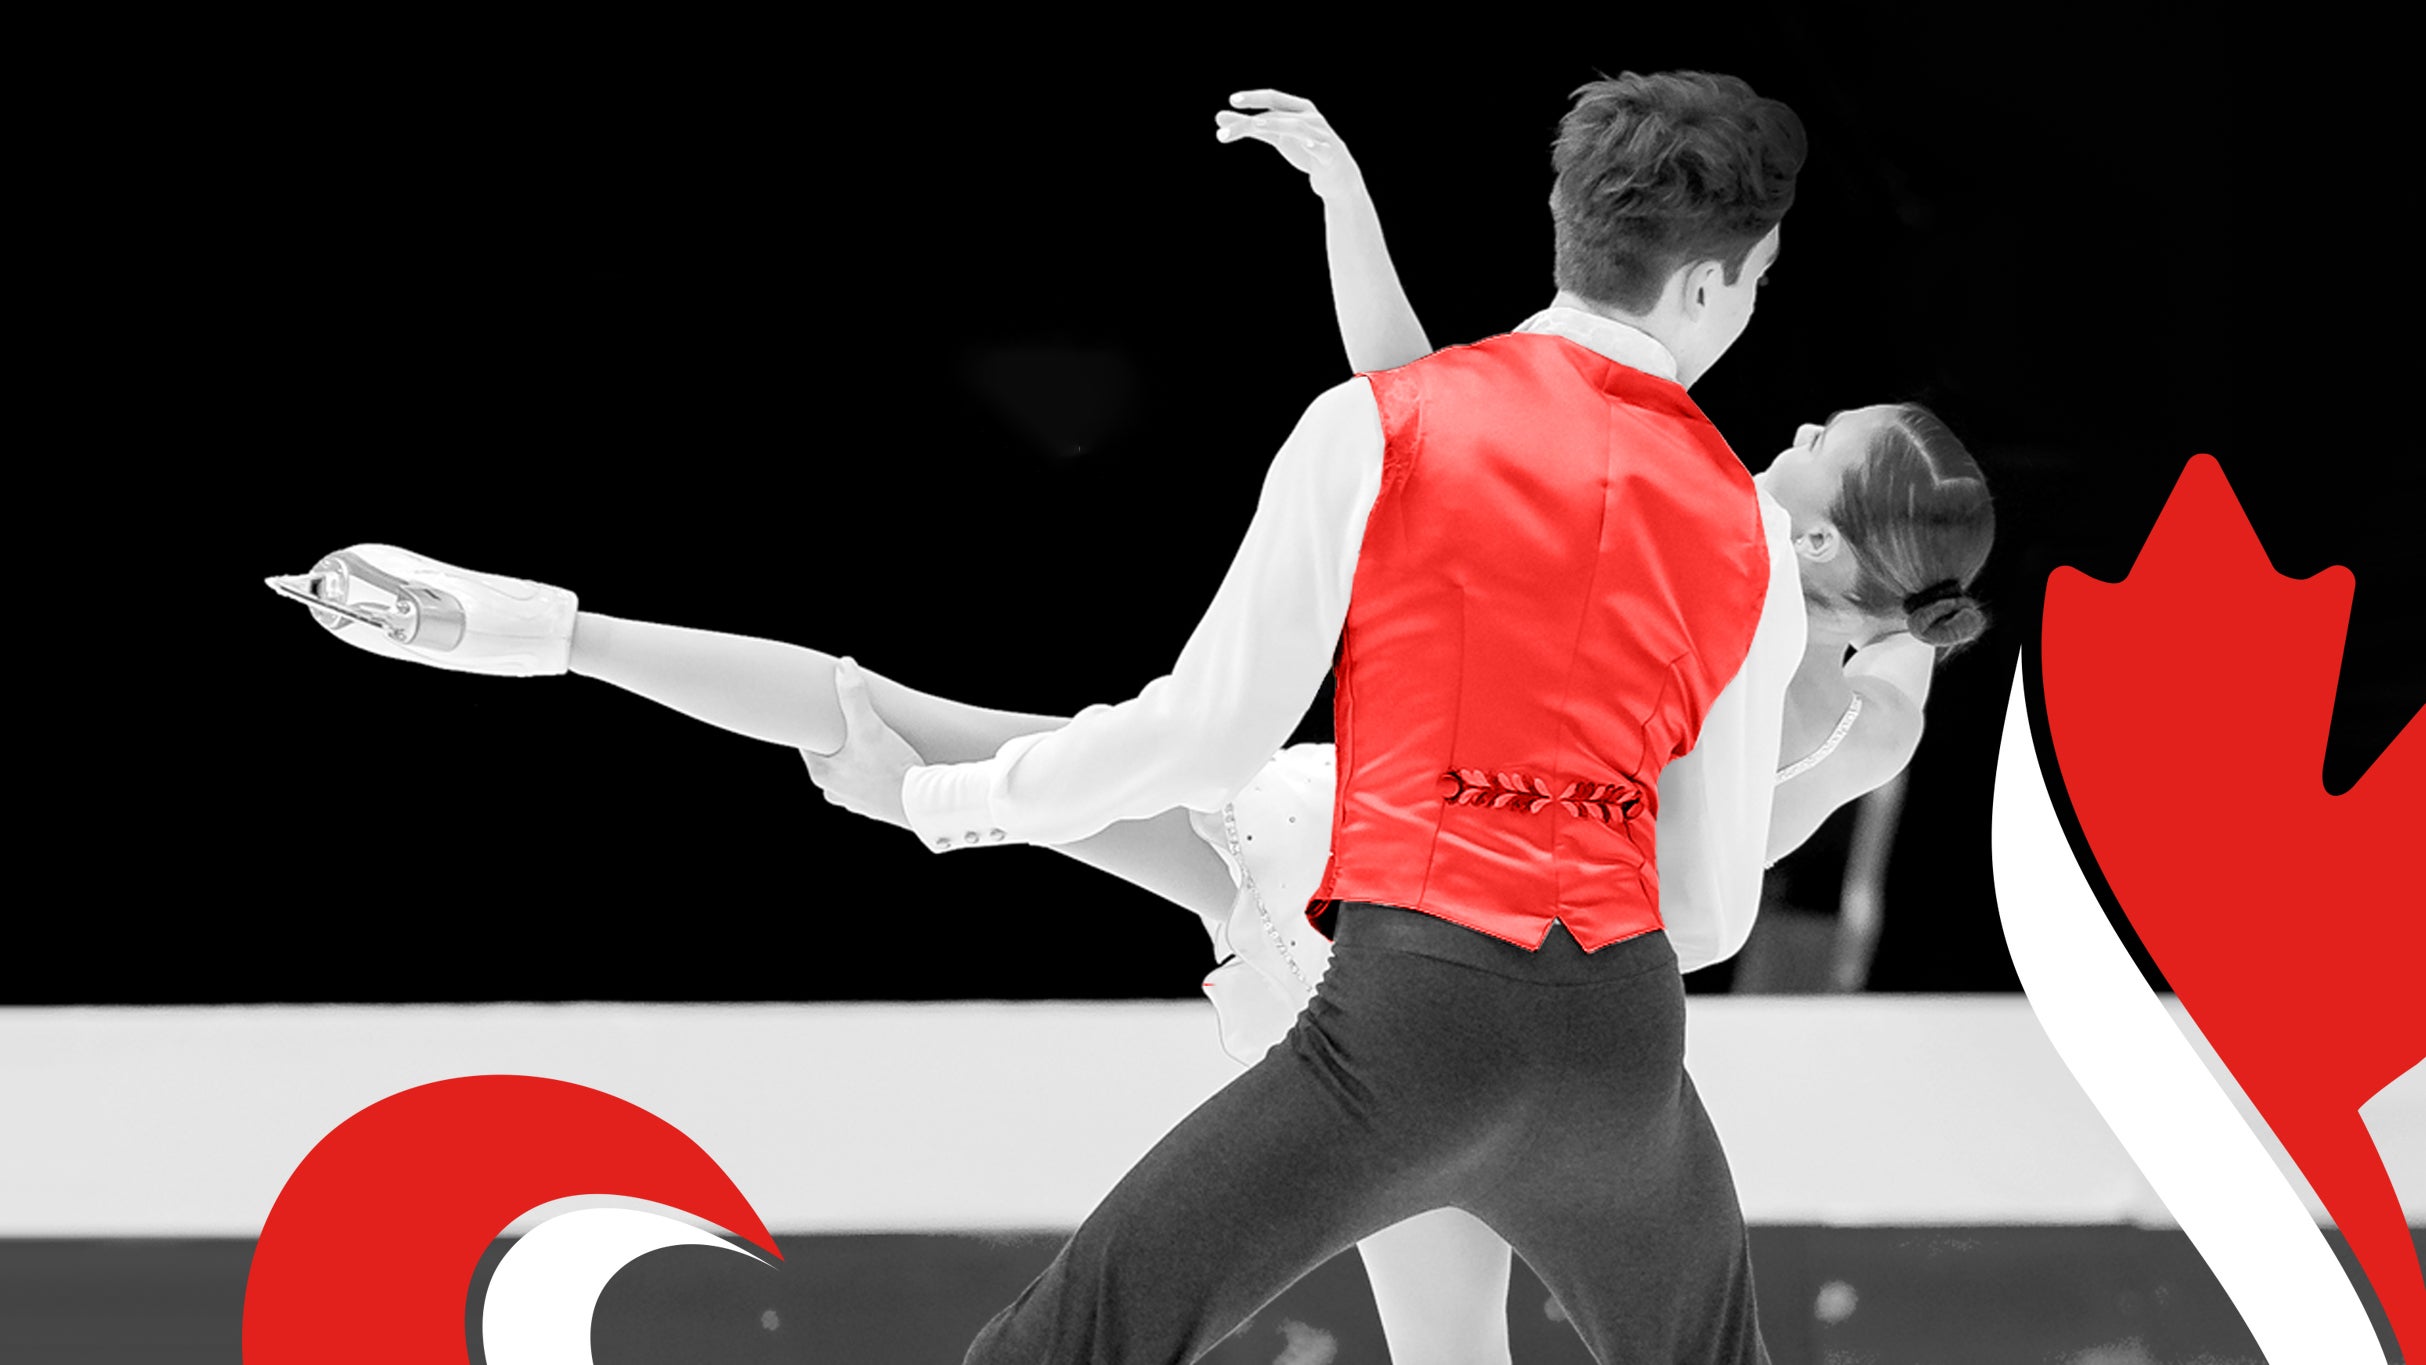 ISU World Junior Figure Skating Championships - All Event Package in Calgary promo photo for Full Event Package Federation presale offer code